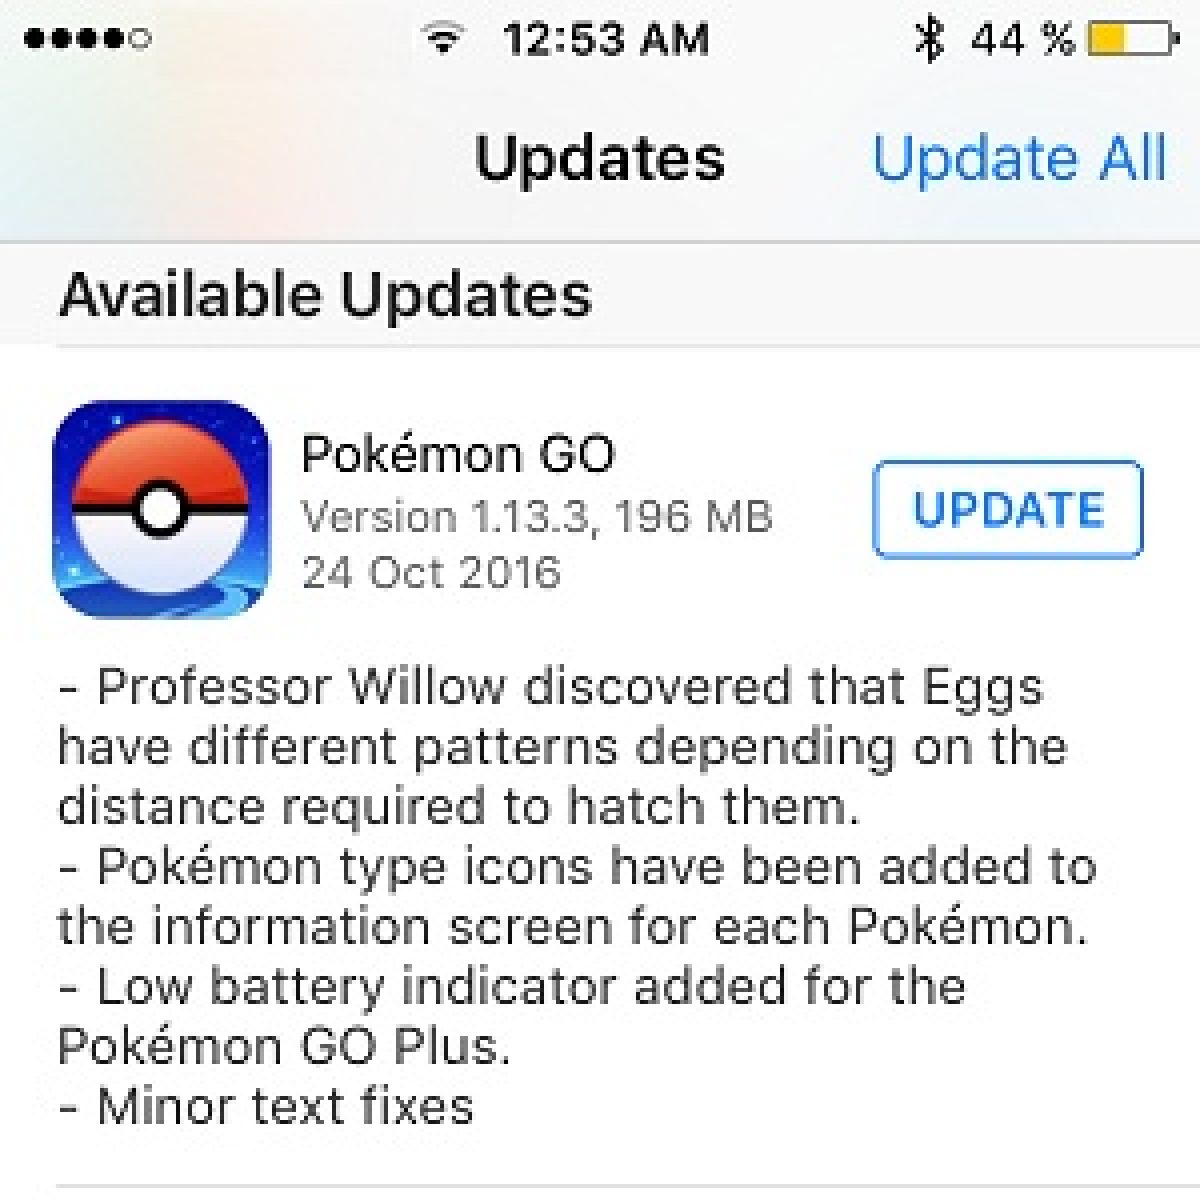 Pokemon Go 1 13 3 Brings Different Colors For Egg Hatching Patterns And A Few Other Minor Changes